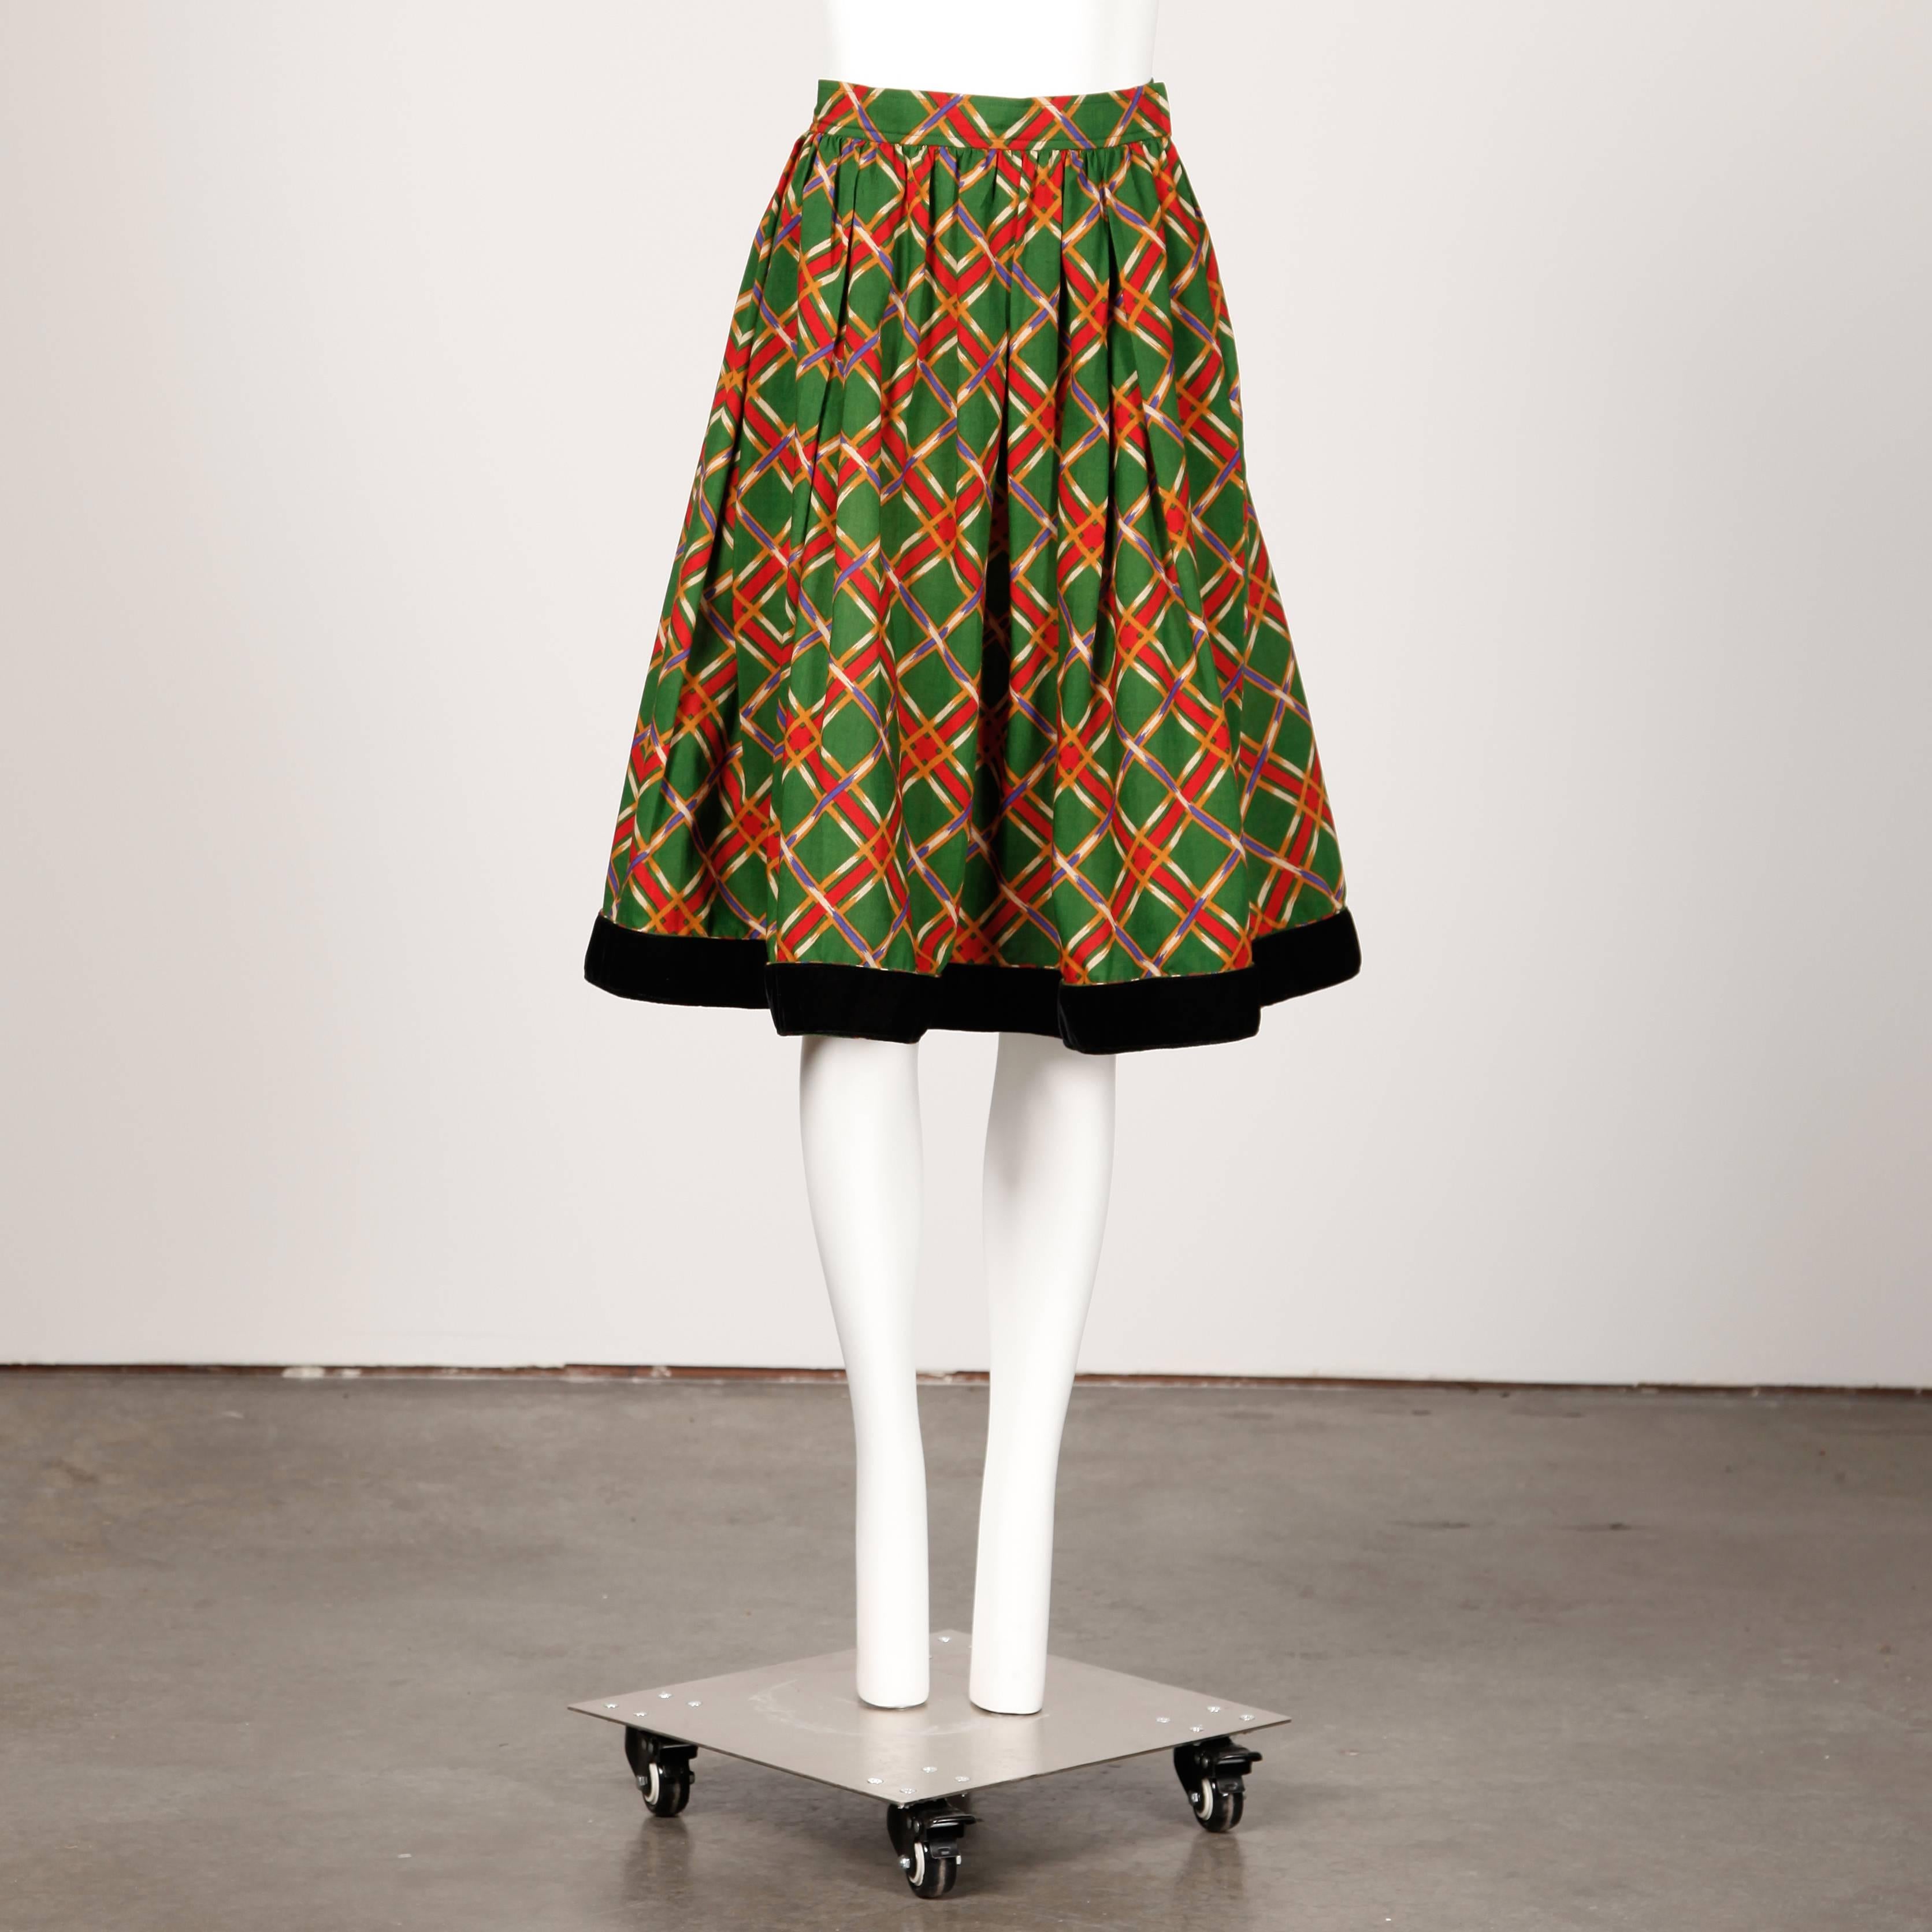 Early Yves Saint Laurent! Vintage 1970s plaid wool midi skirt with a velvet hemline. The marked size is 42 and the skirt fits like a size large.

Details:

Unlined
Front Pockets in Pleats
Side Zip with Snap and Hook Closure
Marked Size: